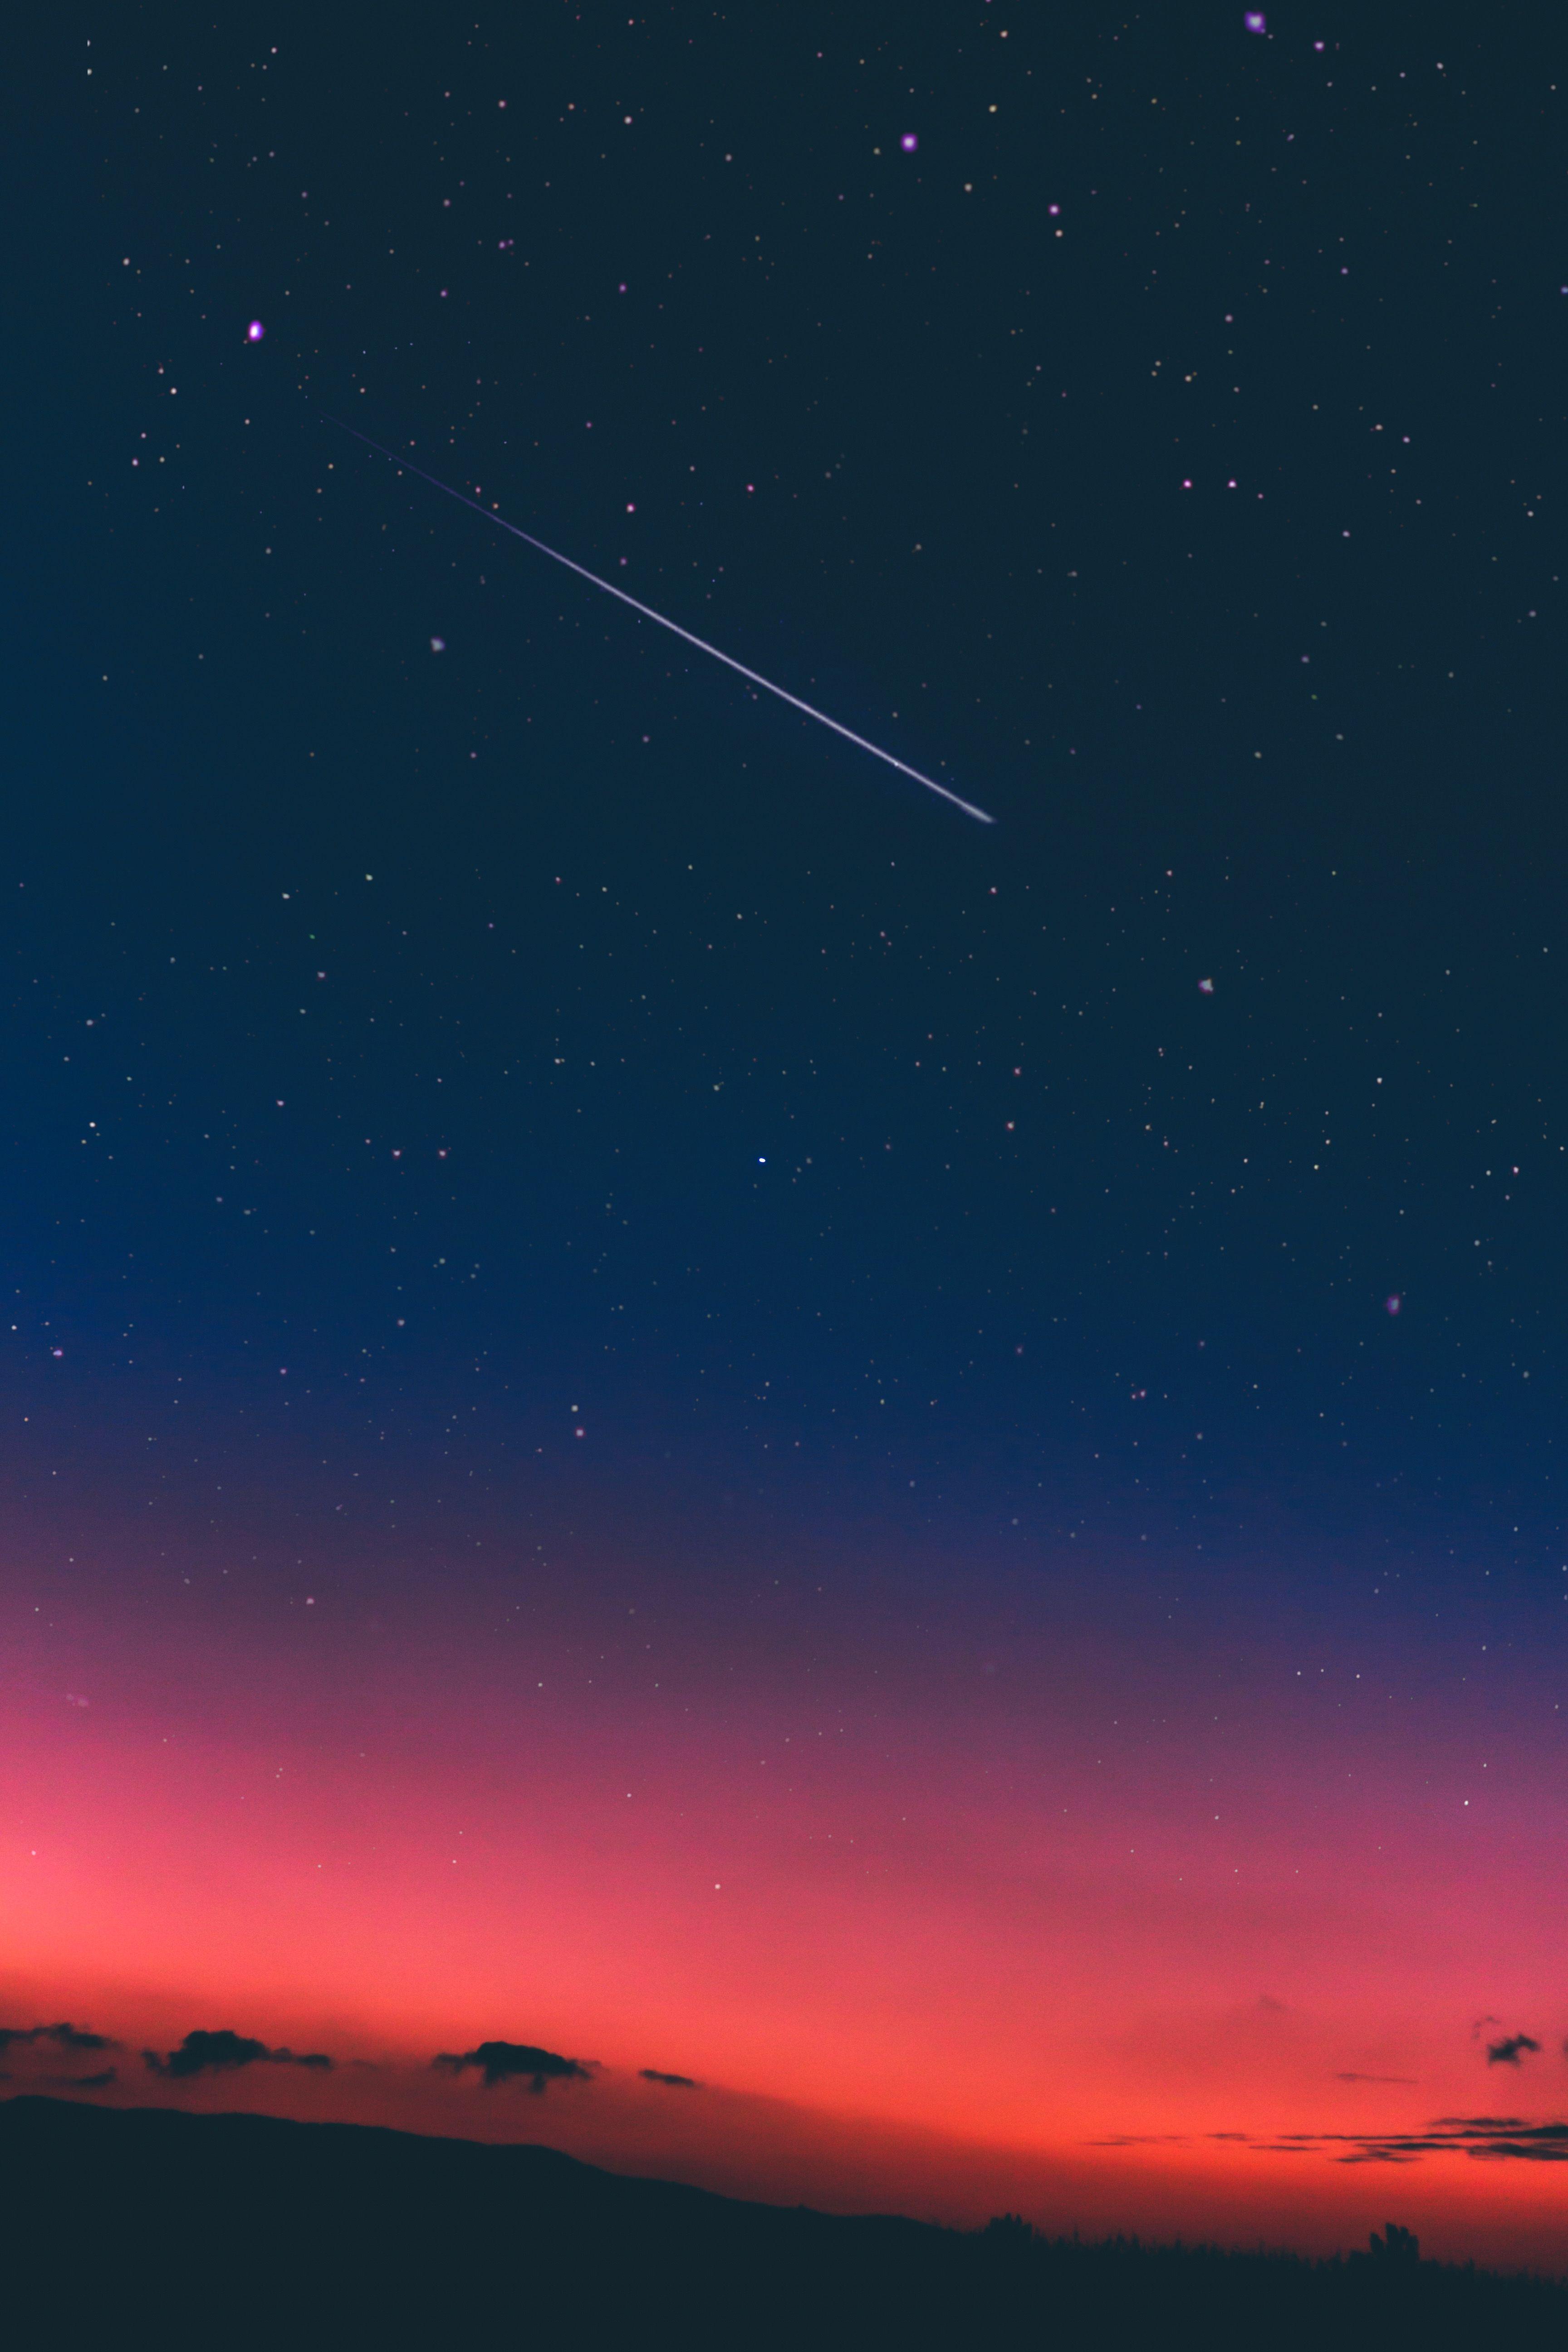 Night Sky with Shooting Star. TAGS: pink, blue, deep